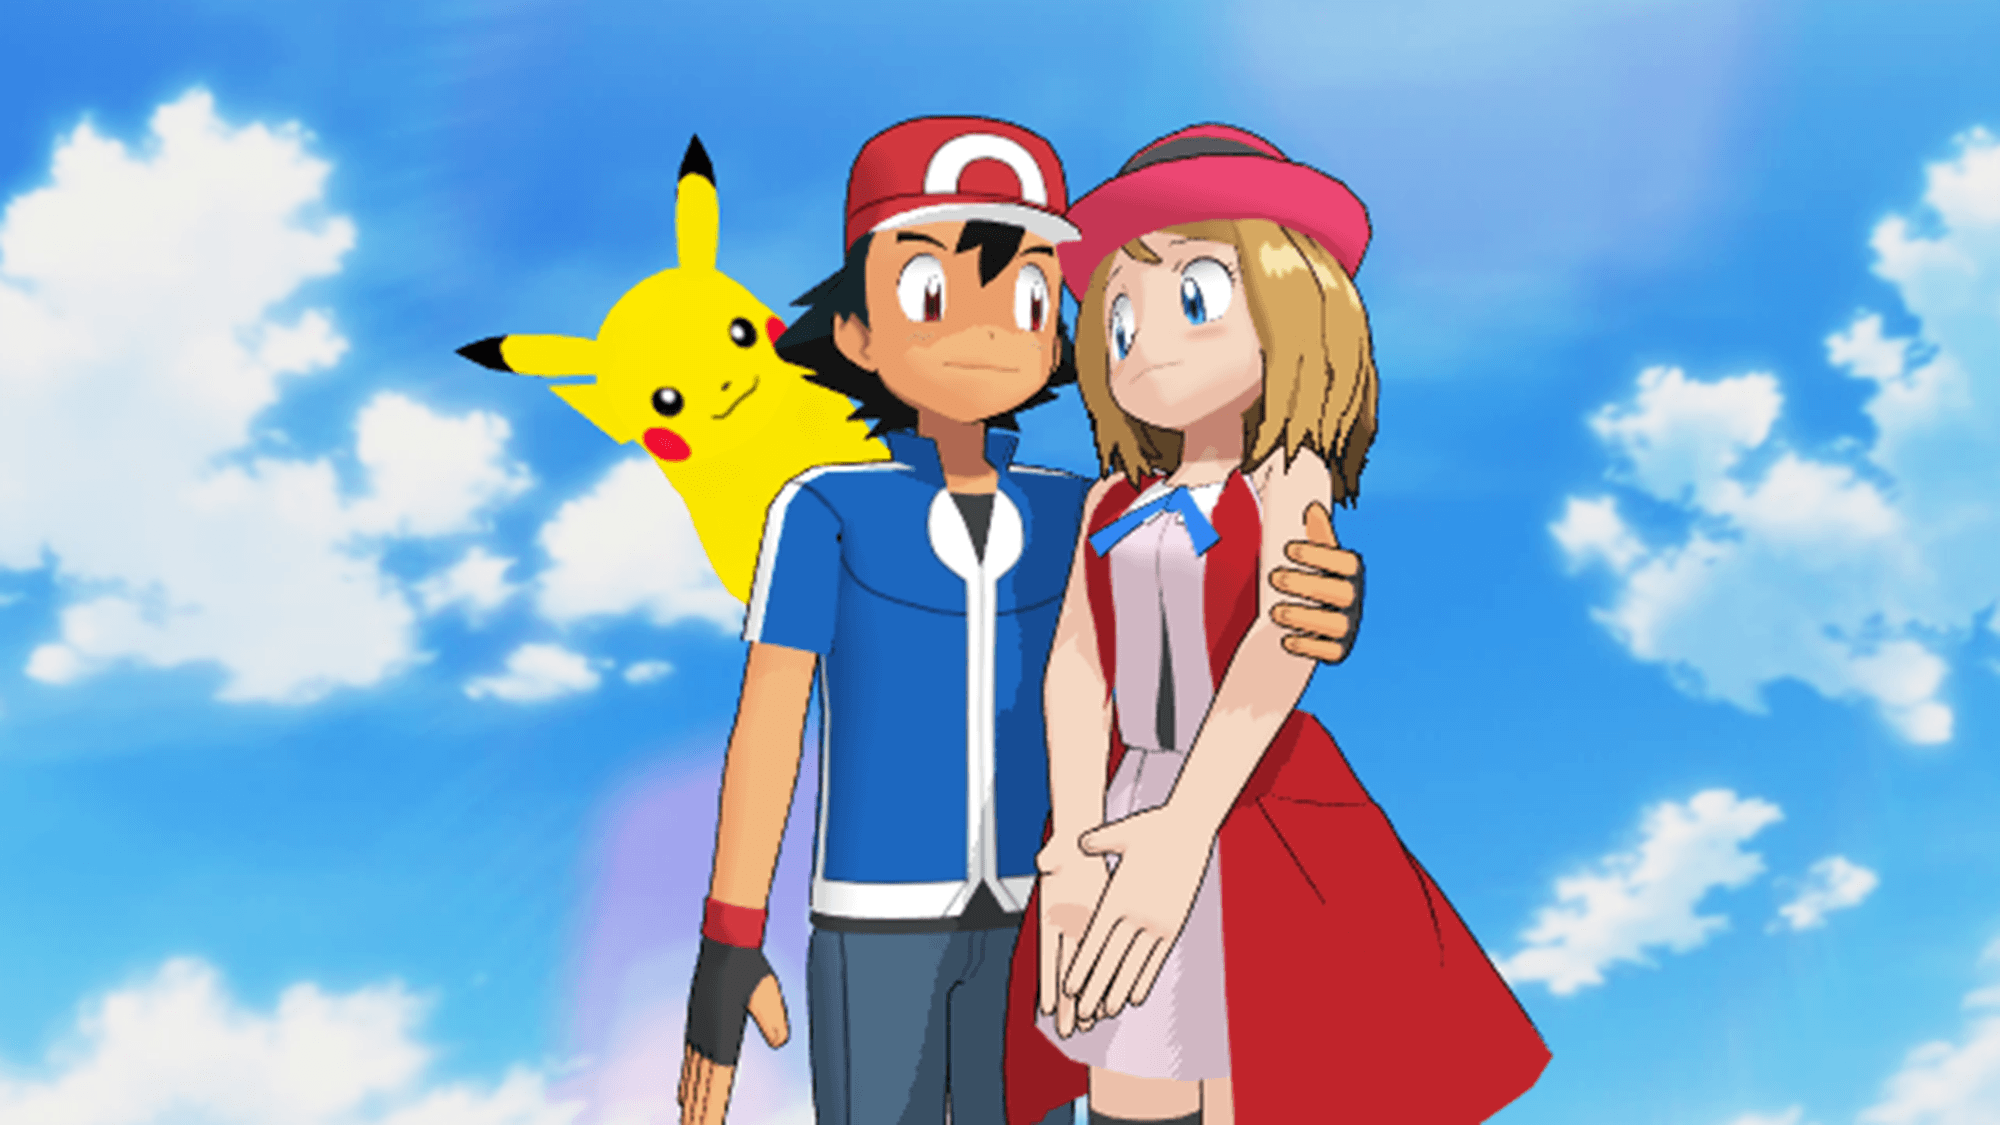 Ash Ketchum and Serena are Together with Pikachu